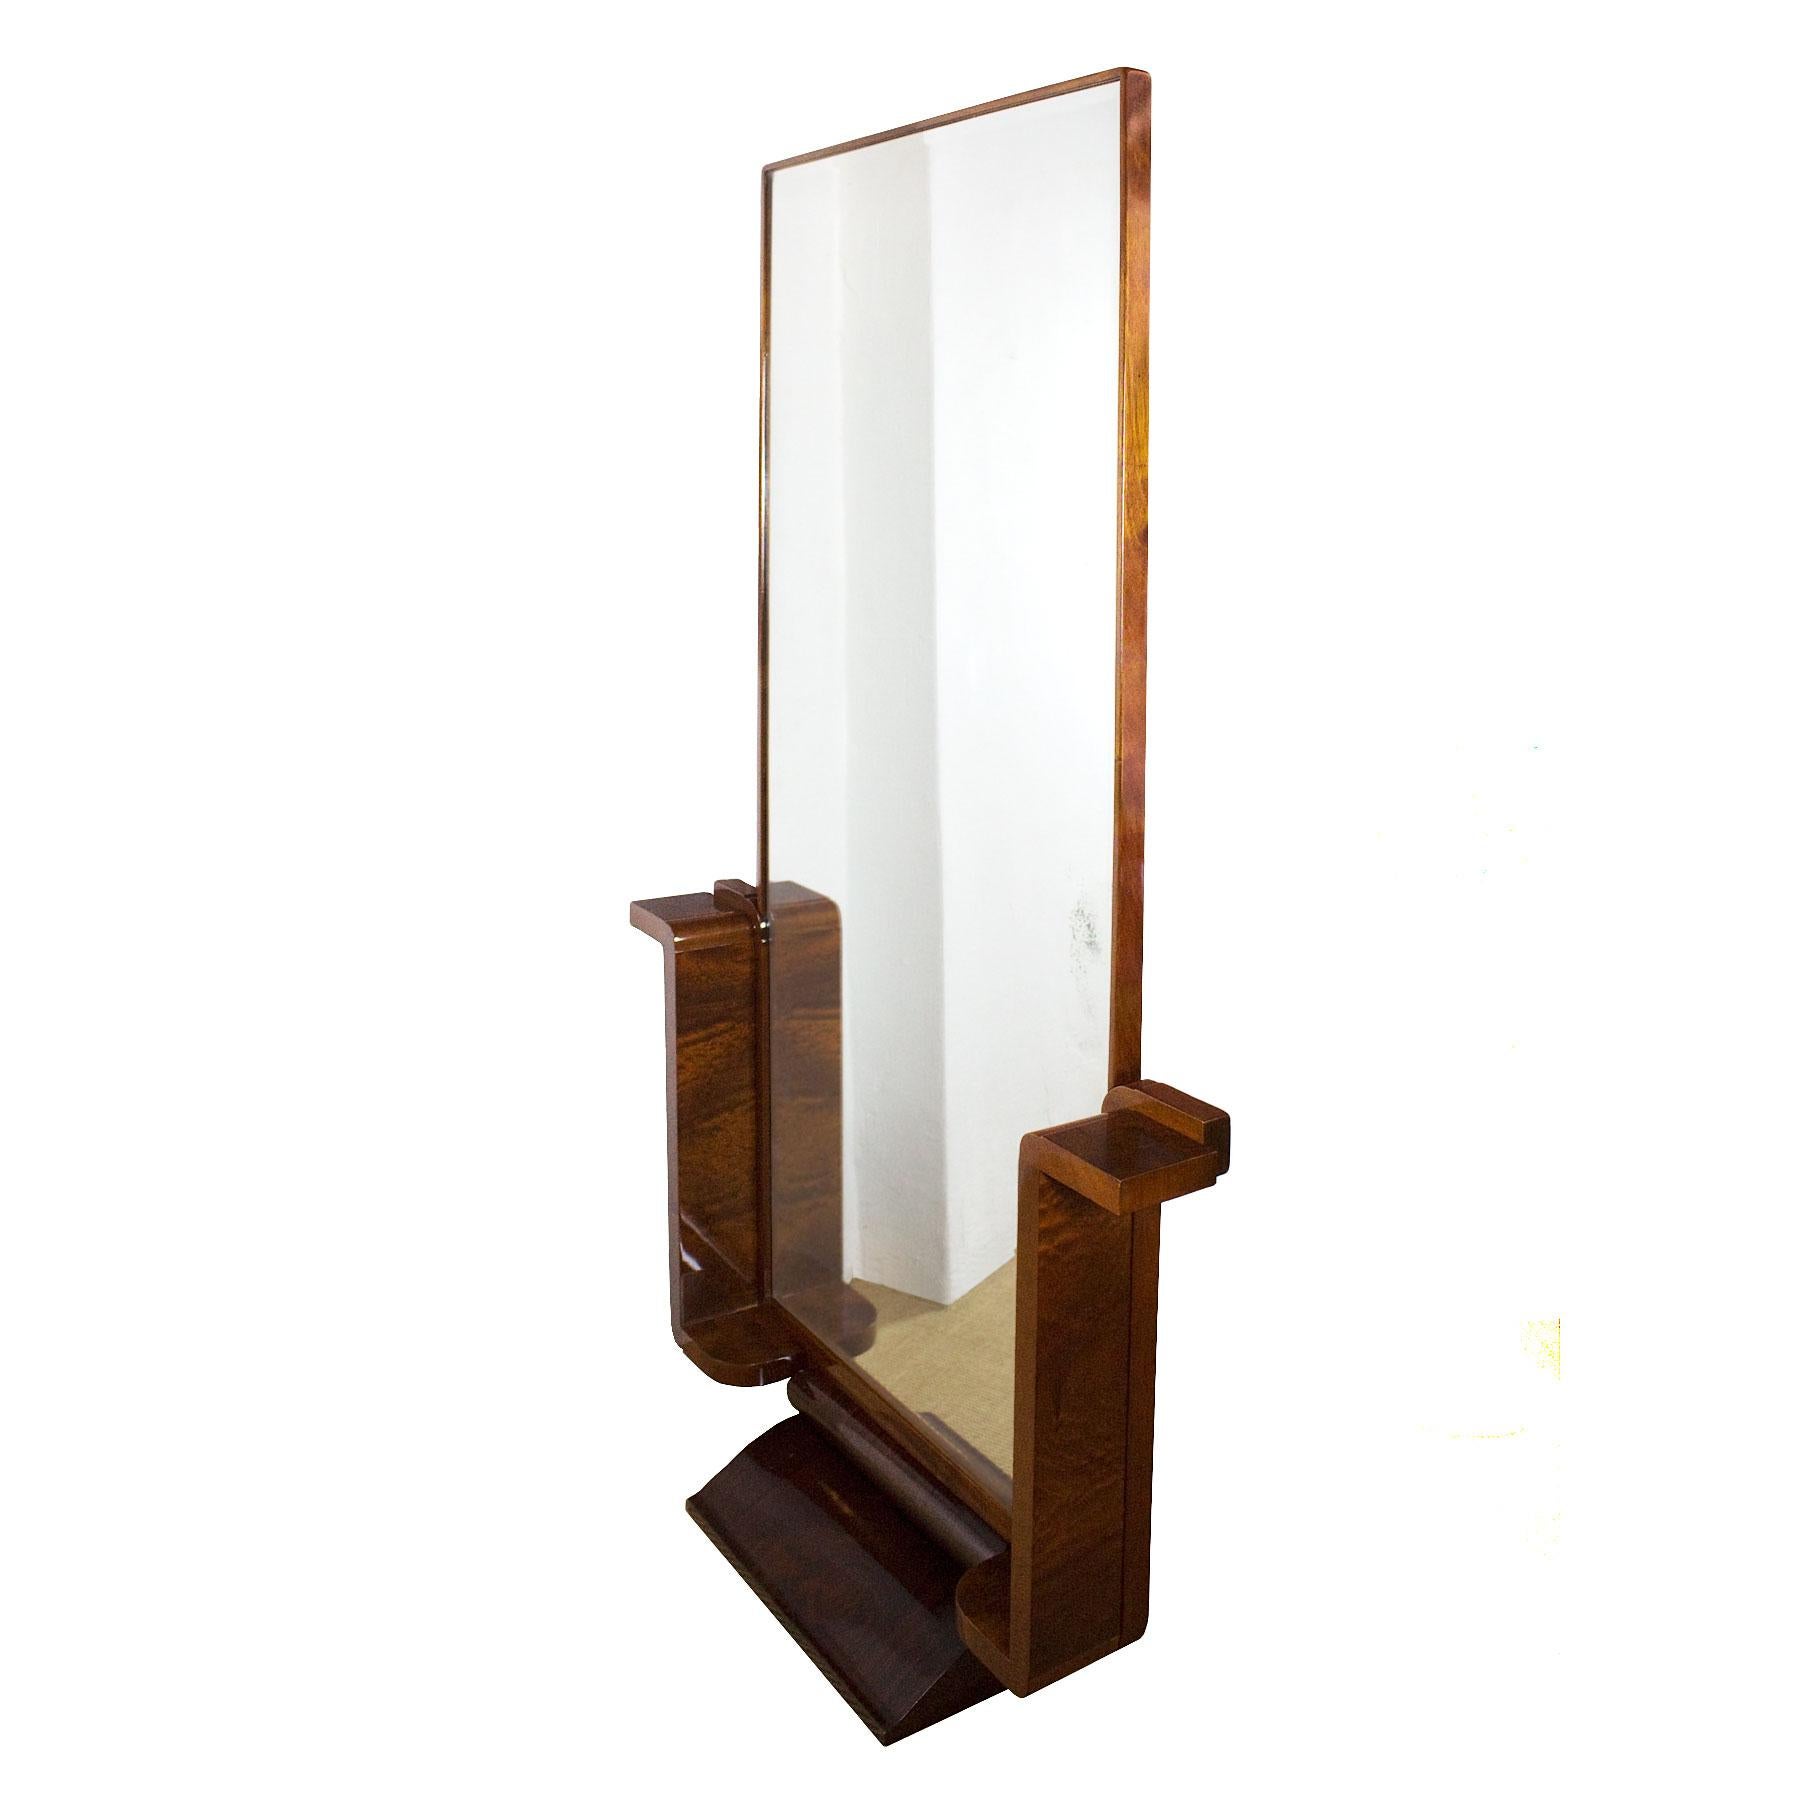 Splendid high quality Art Deco vanity, solid mahogany and mottled mahogany veneer, French polish. Original beveled mirror (some oxidation).

In the style of Jean Fauré.

School of Toulouse, France, circa 1930.